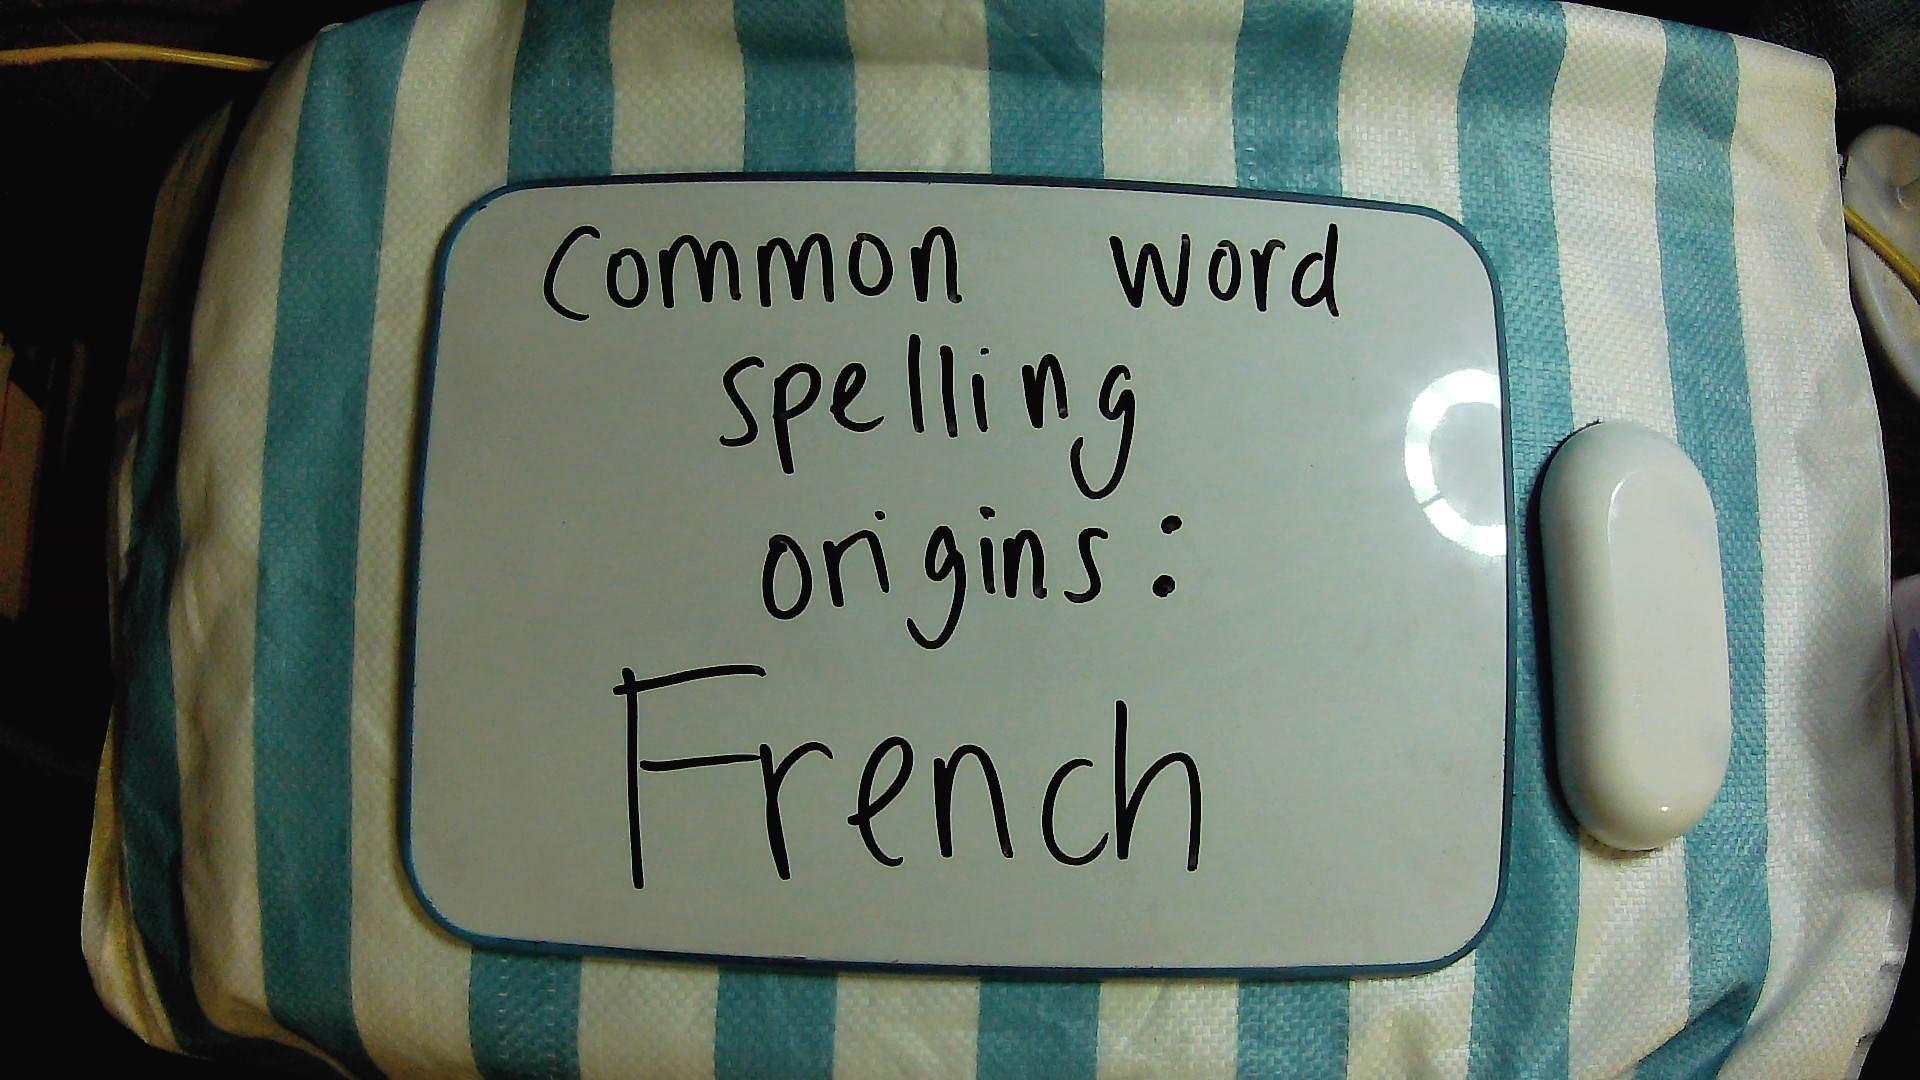 Word Spellings with a French Origin